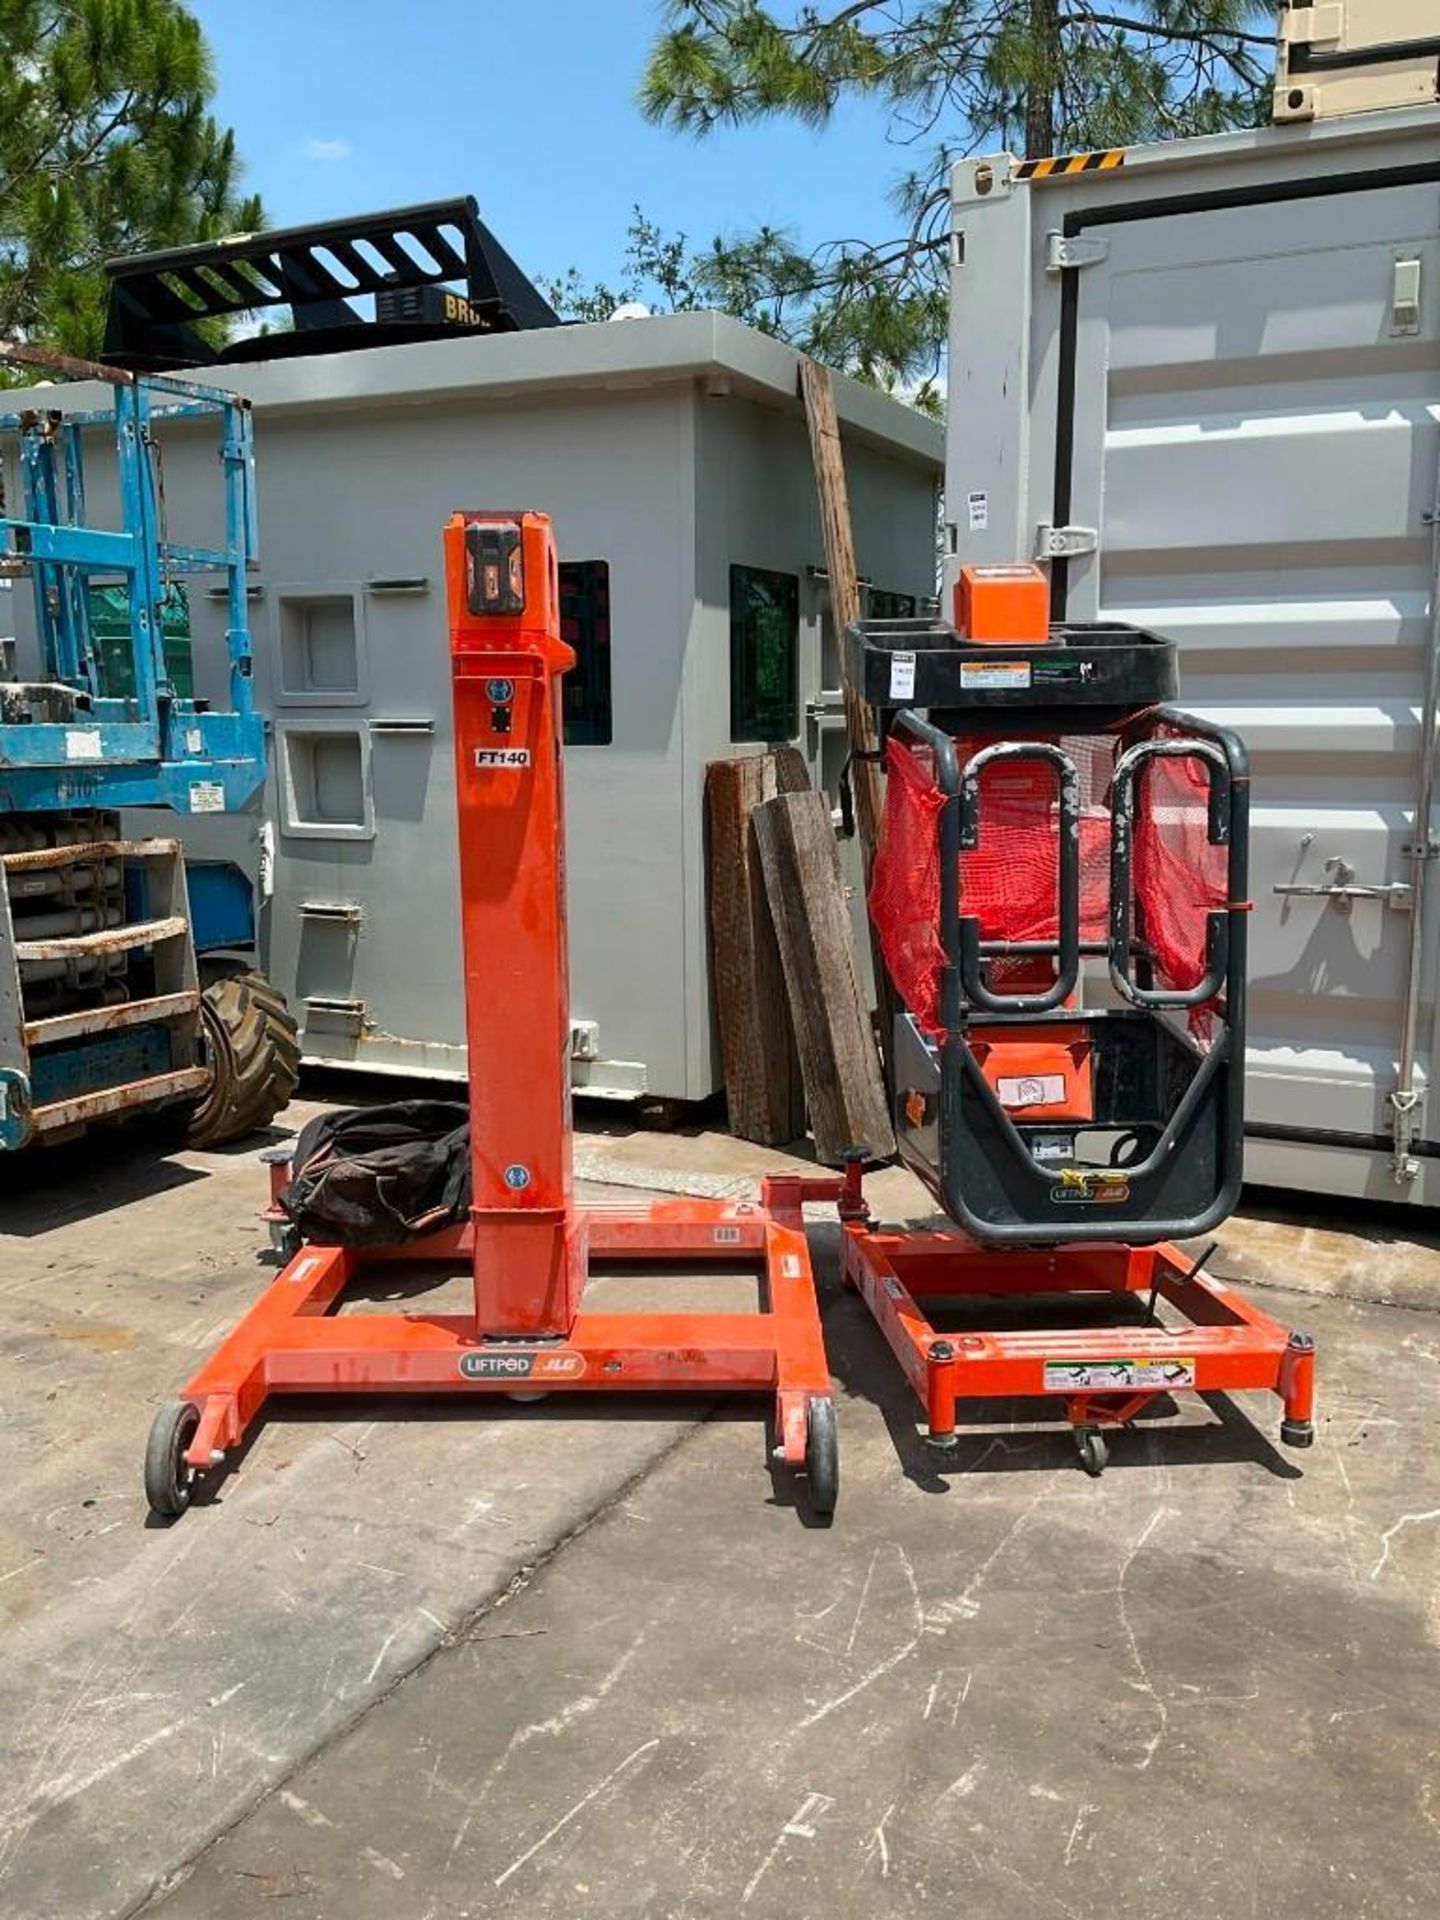 ( 1 ) JLG PERSONAL PORTABLE LIFTPOD MODEL FT140, APPROX MAX CAPACITY 330LBS, APPROX MAX HEIGHT 13.5F